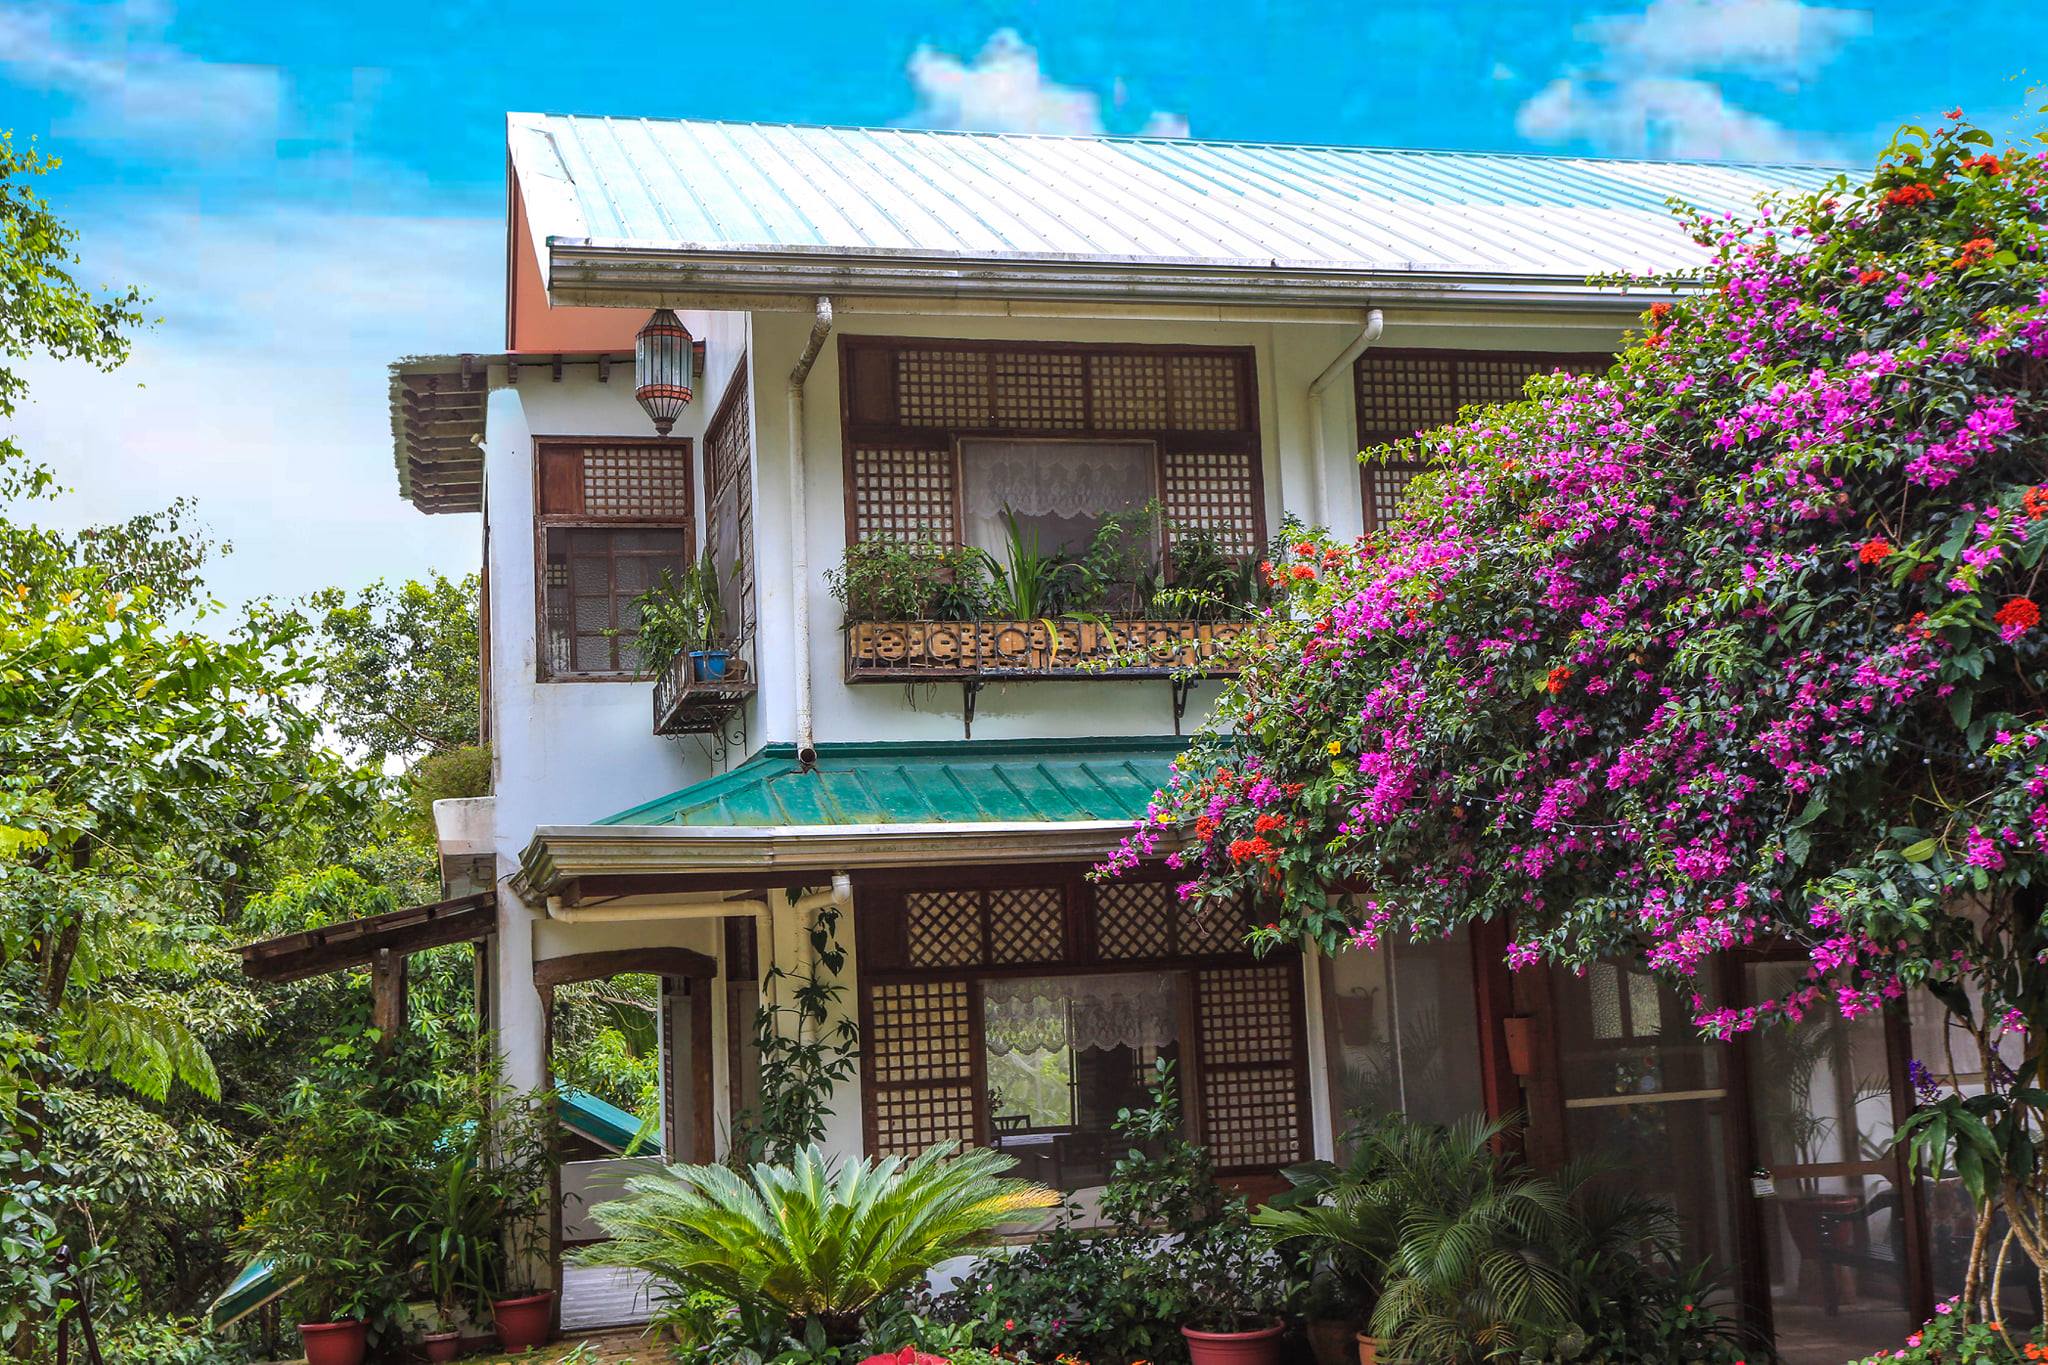 Best place to stay in Tagaytay for getaway